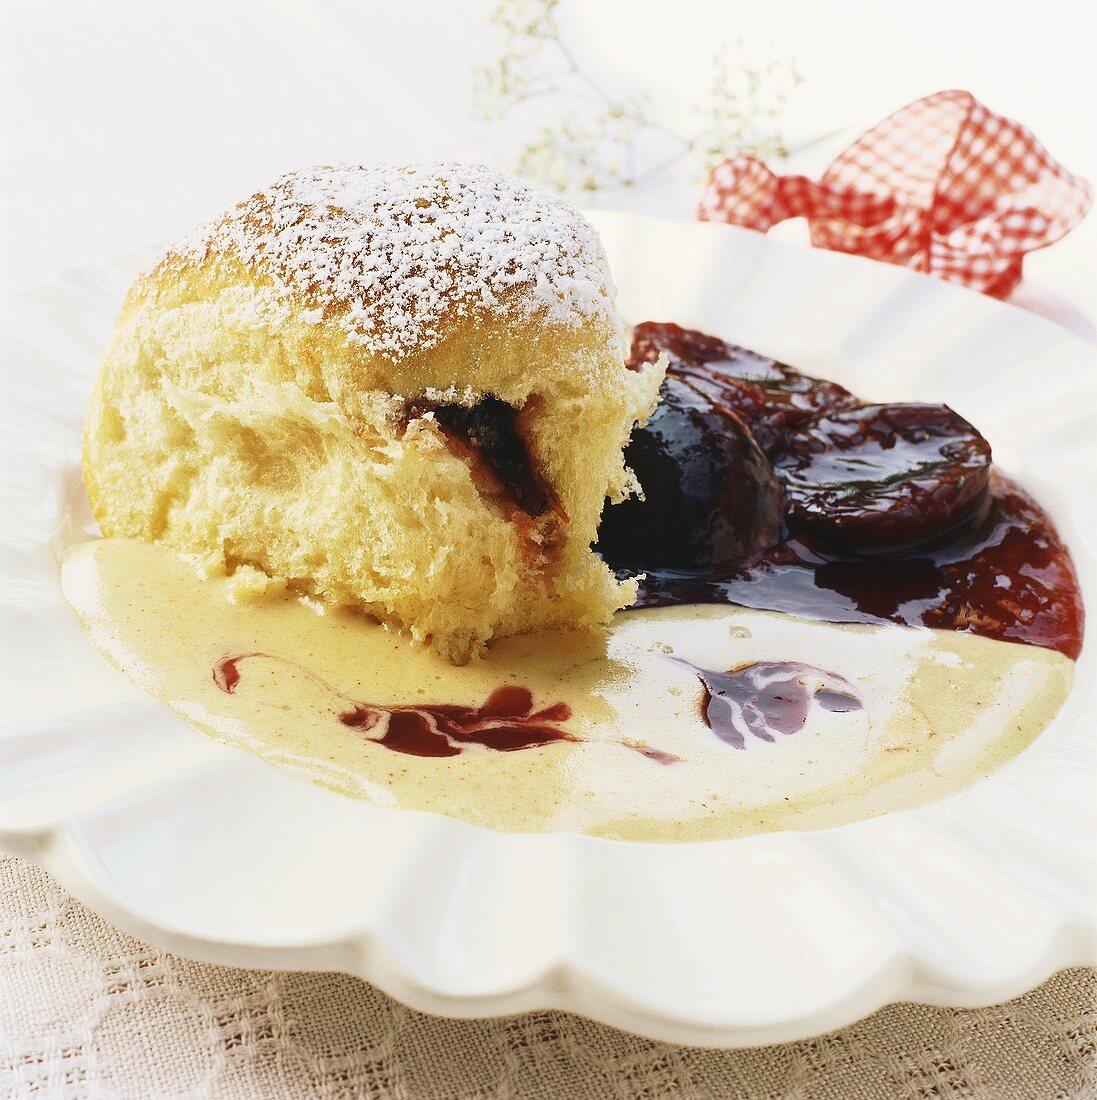 Filled yeast dumplings (Buchteln) with plum compote